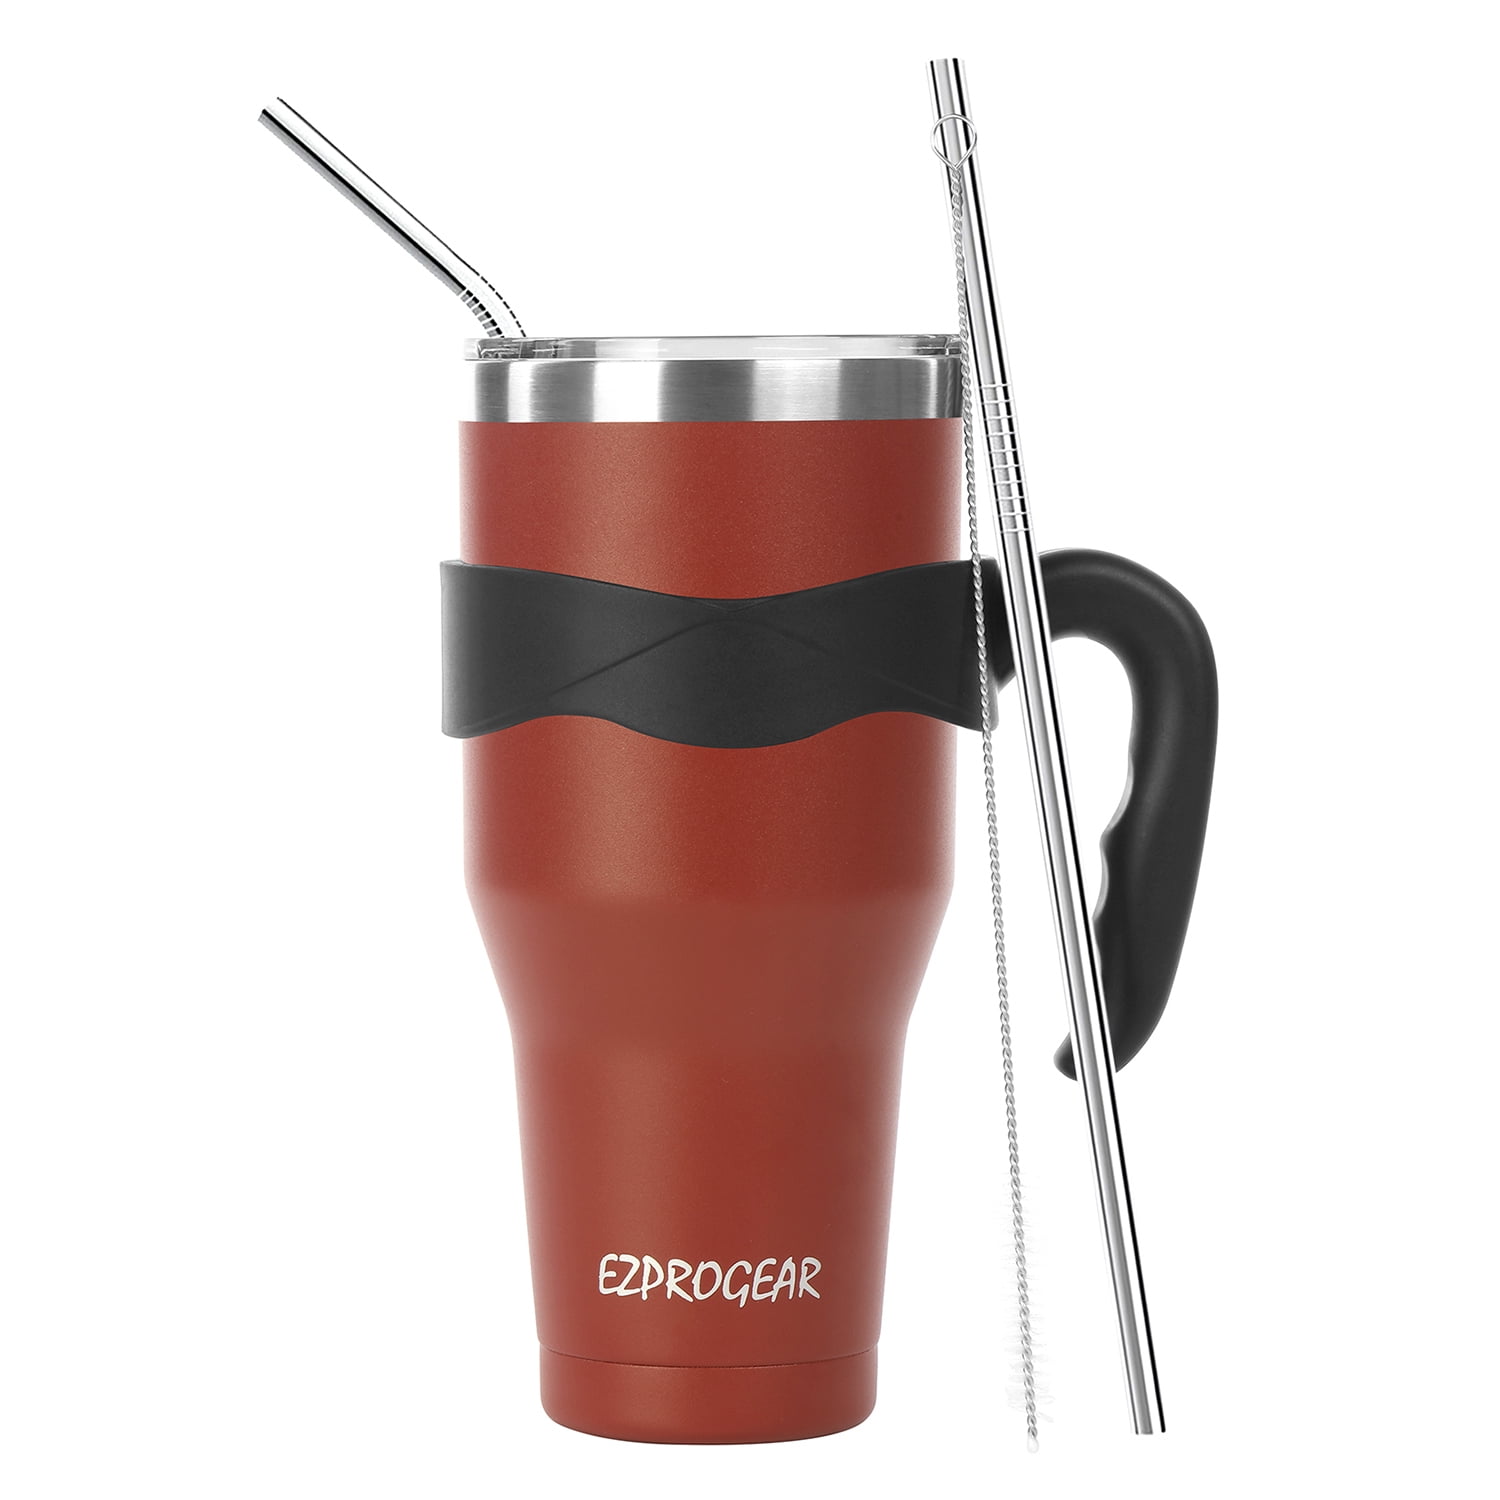 40oz Tumbler Elevate Hydragear is a stainless steel tumbler with a